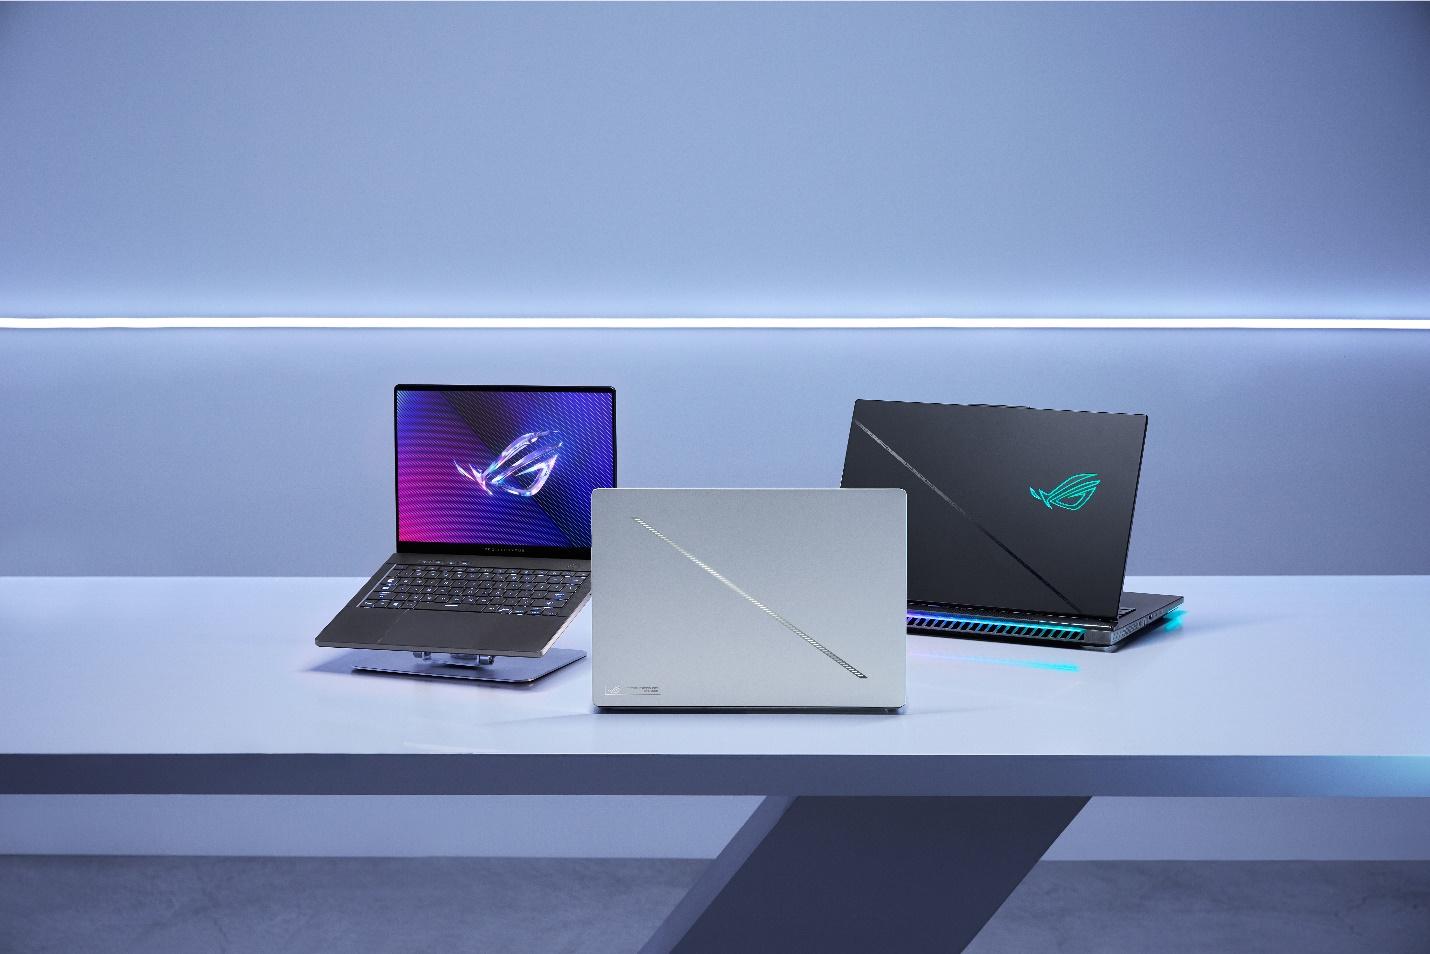 Several laptops on a table

Description automatically generated